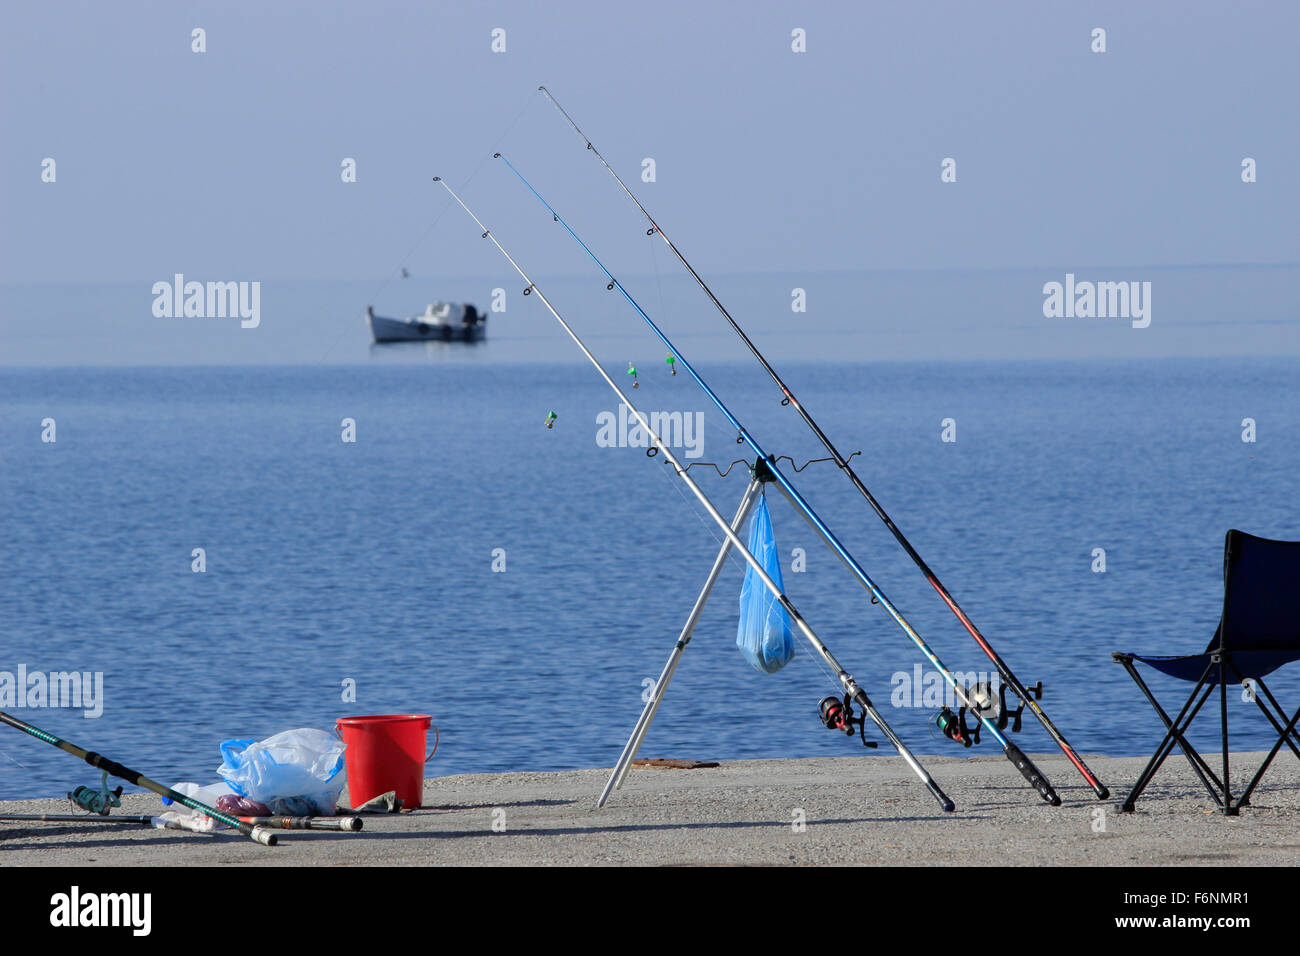 https://c8.alamy.com/comp/F6NMR1/fishing-rods-and-holders-in-the-port-of-myrina-with-wooden-fishermans-F6NMR1.jpg